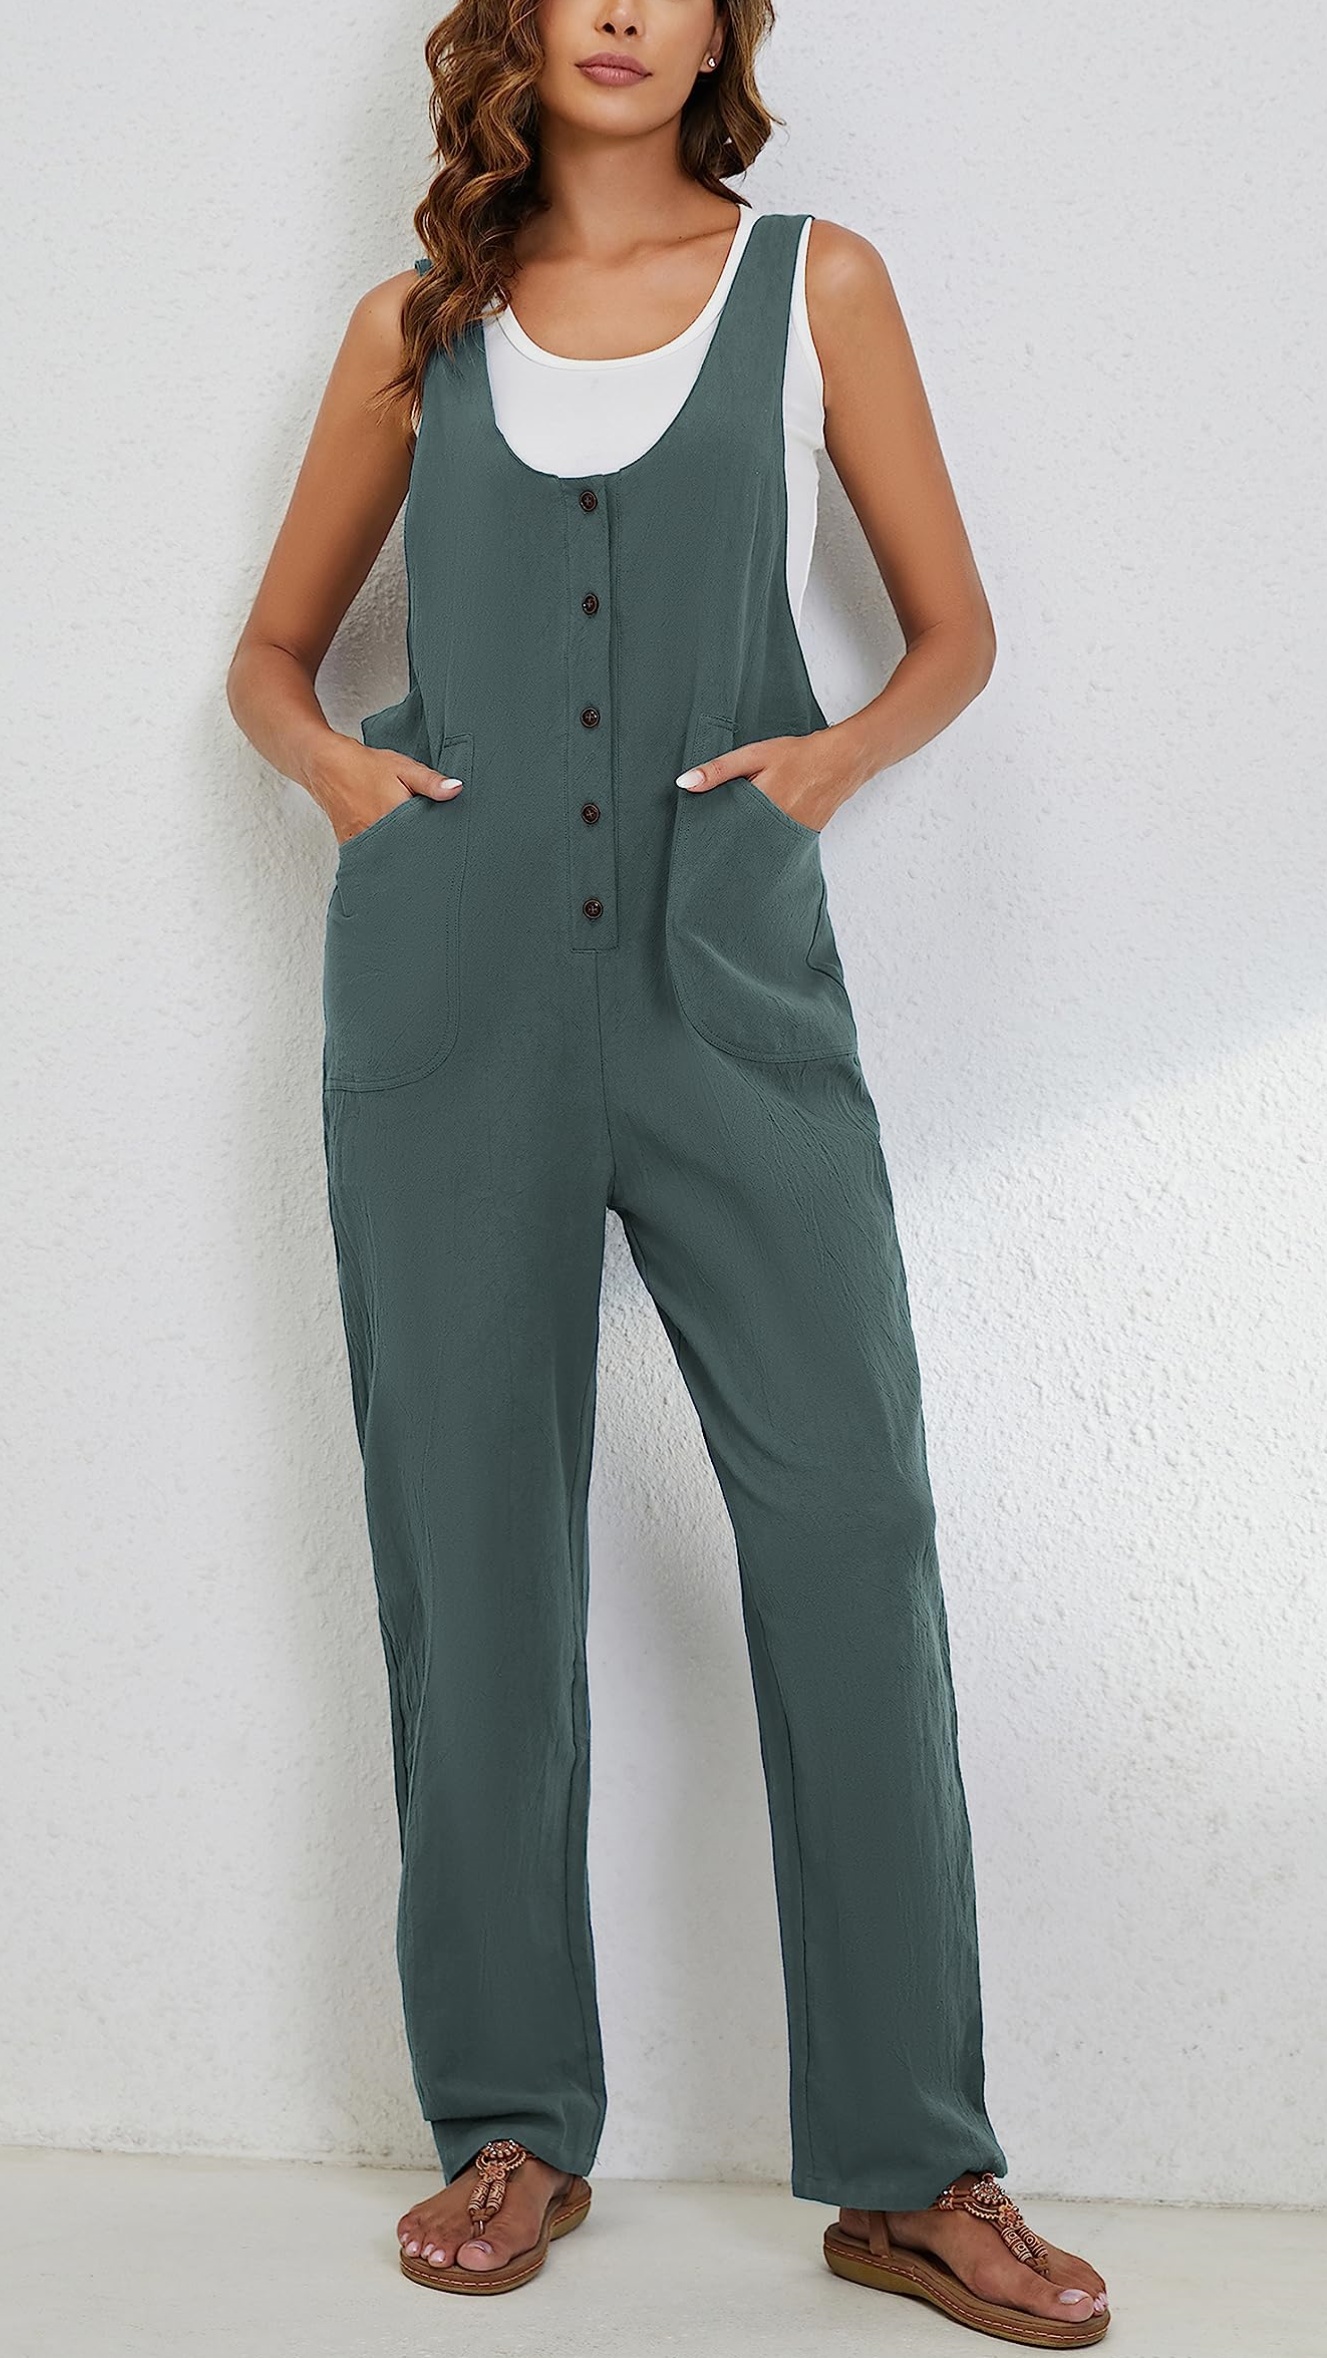 Women’s Adjustable Straps Button Up Jumpsuits (Buy 2 Free Shipping)